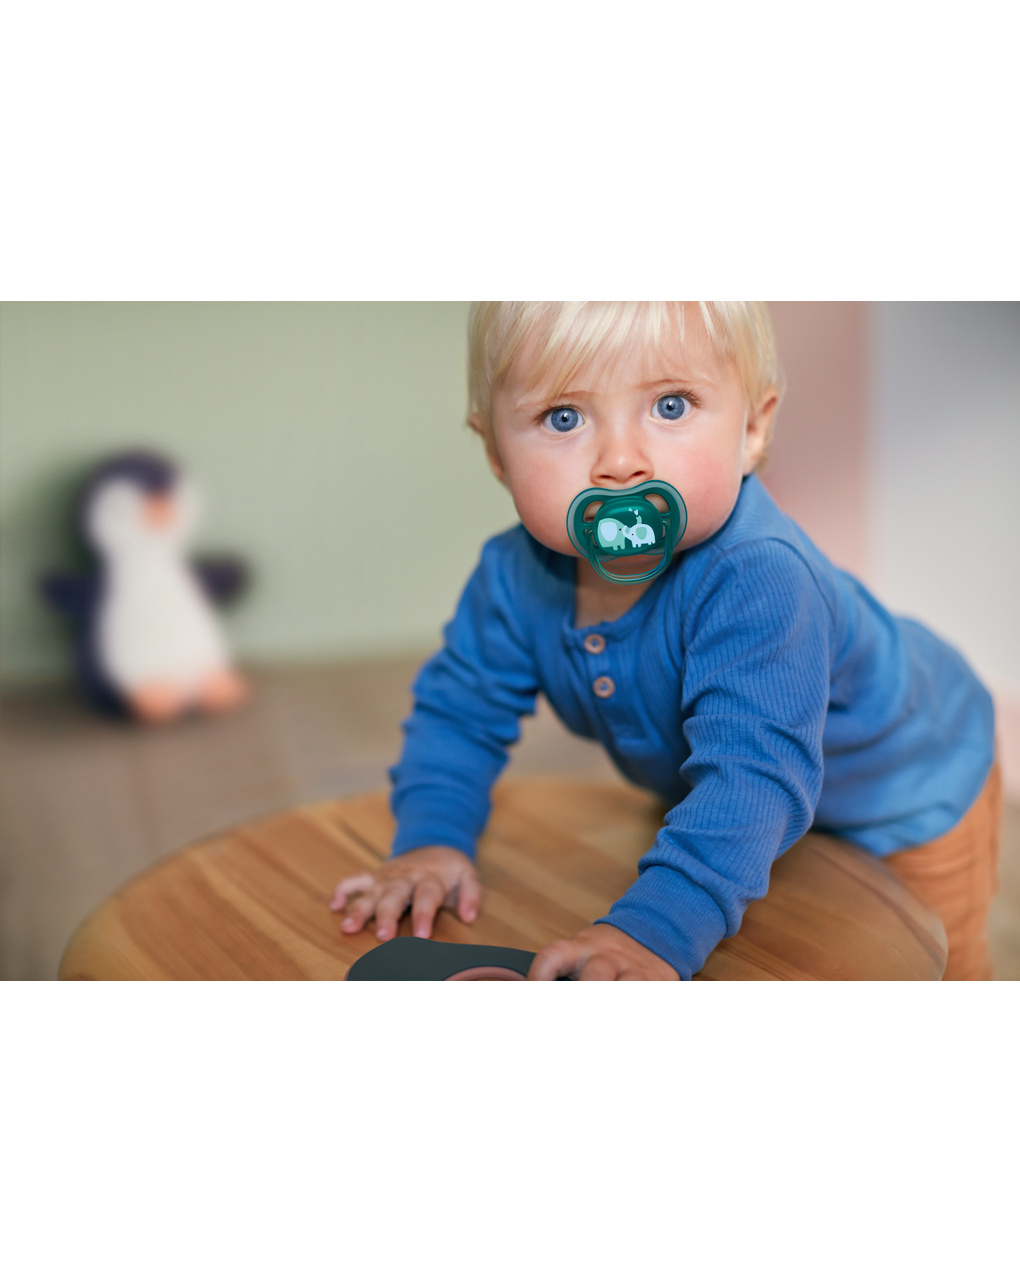 2 chupetes ultra air 18+ mesi colore verde/azul - philips avent - Philips Avent